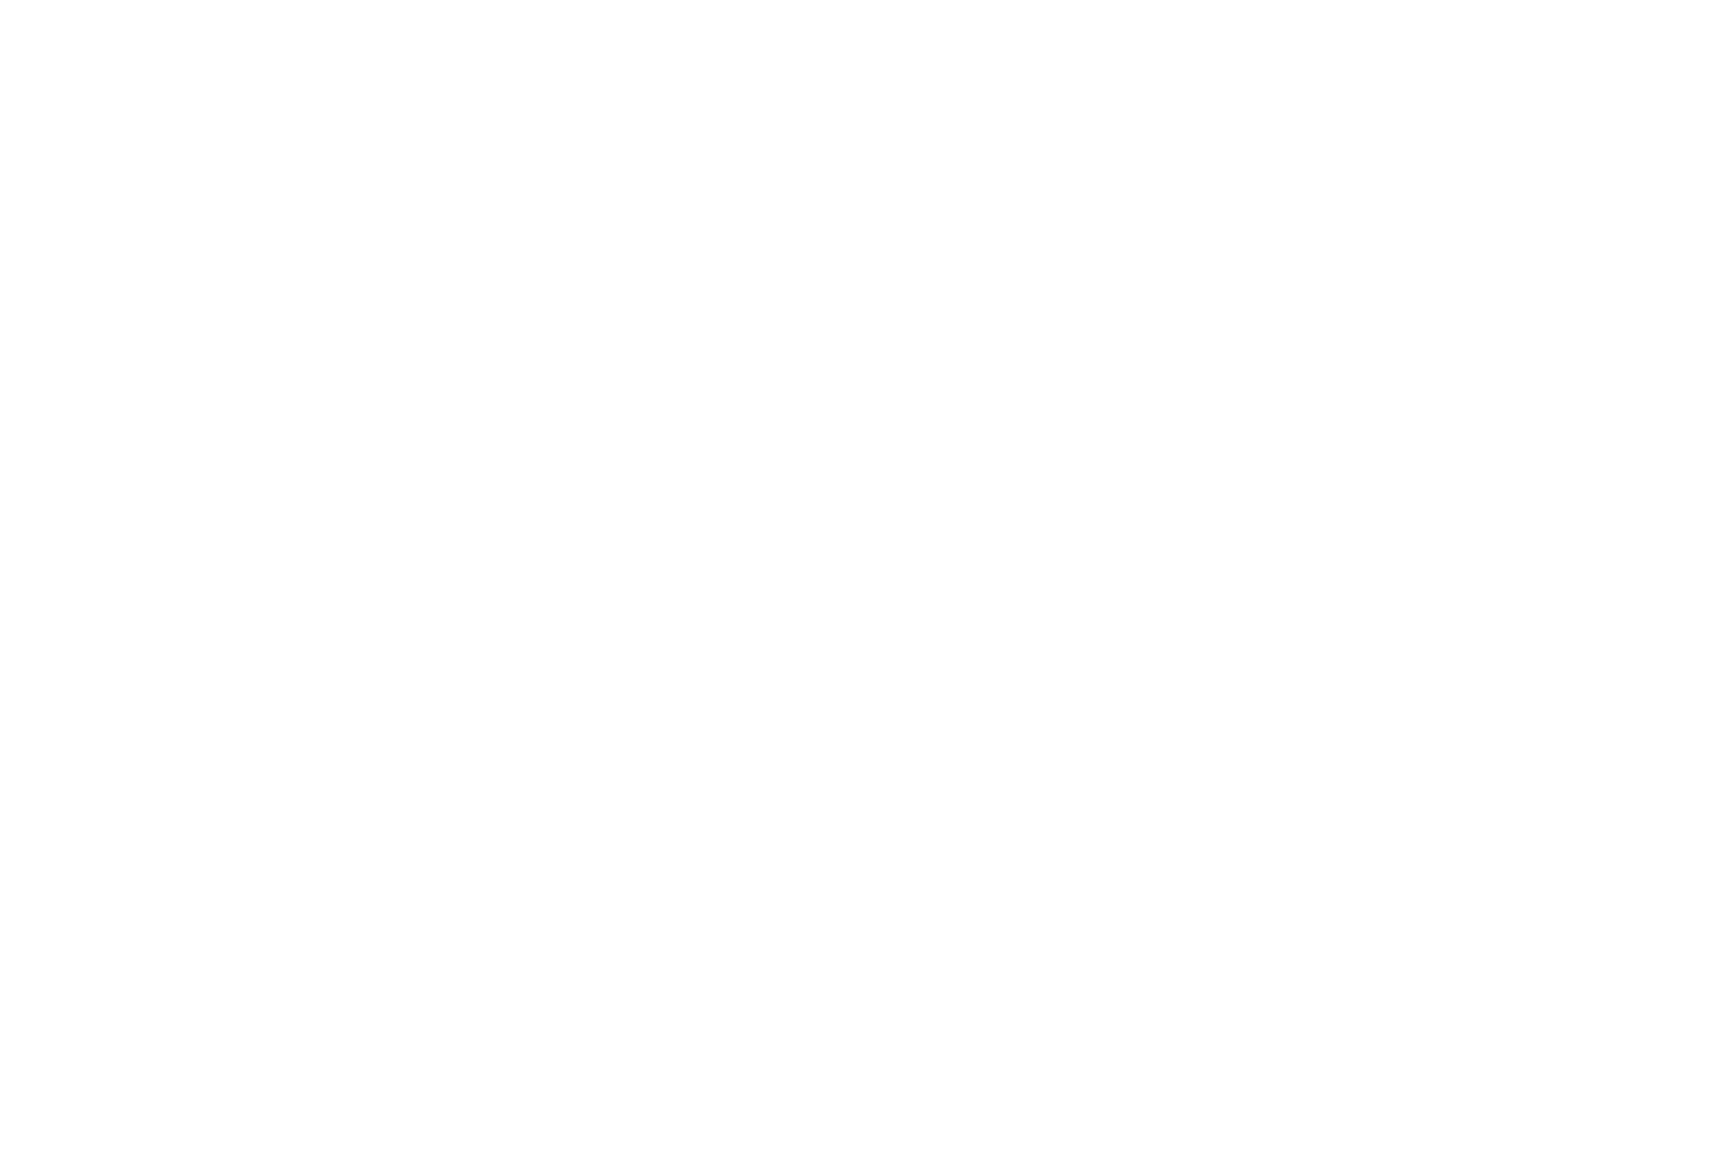 OFFICIAL SELECTION - 307 International Film Festival Wyoming - 2021.png